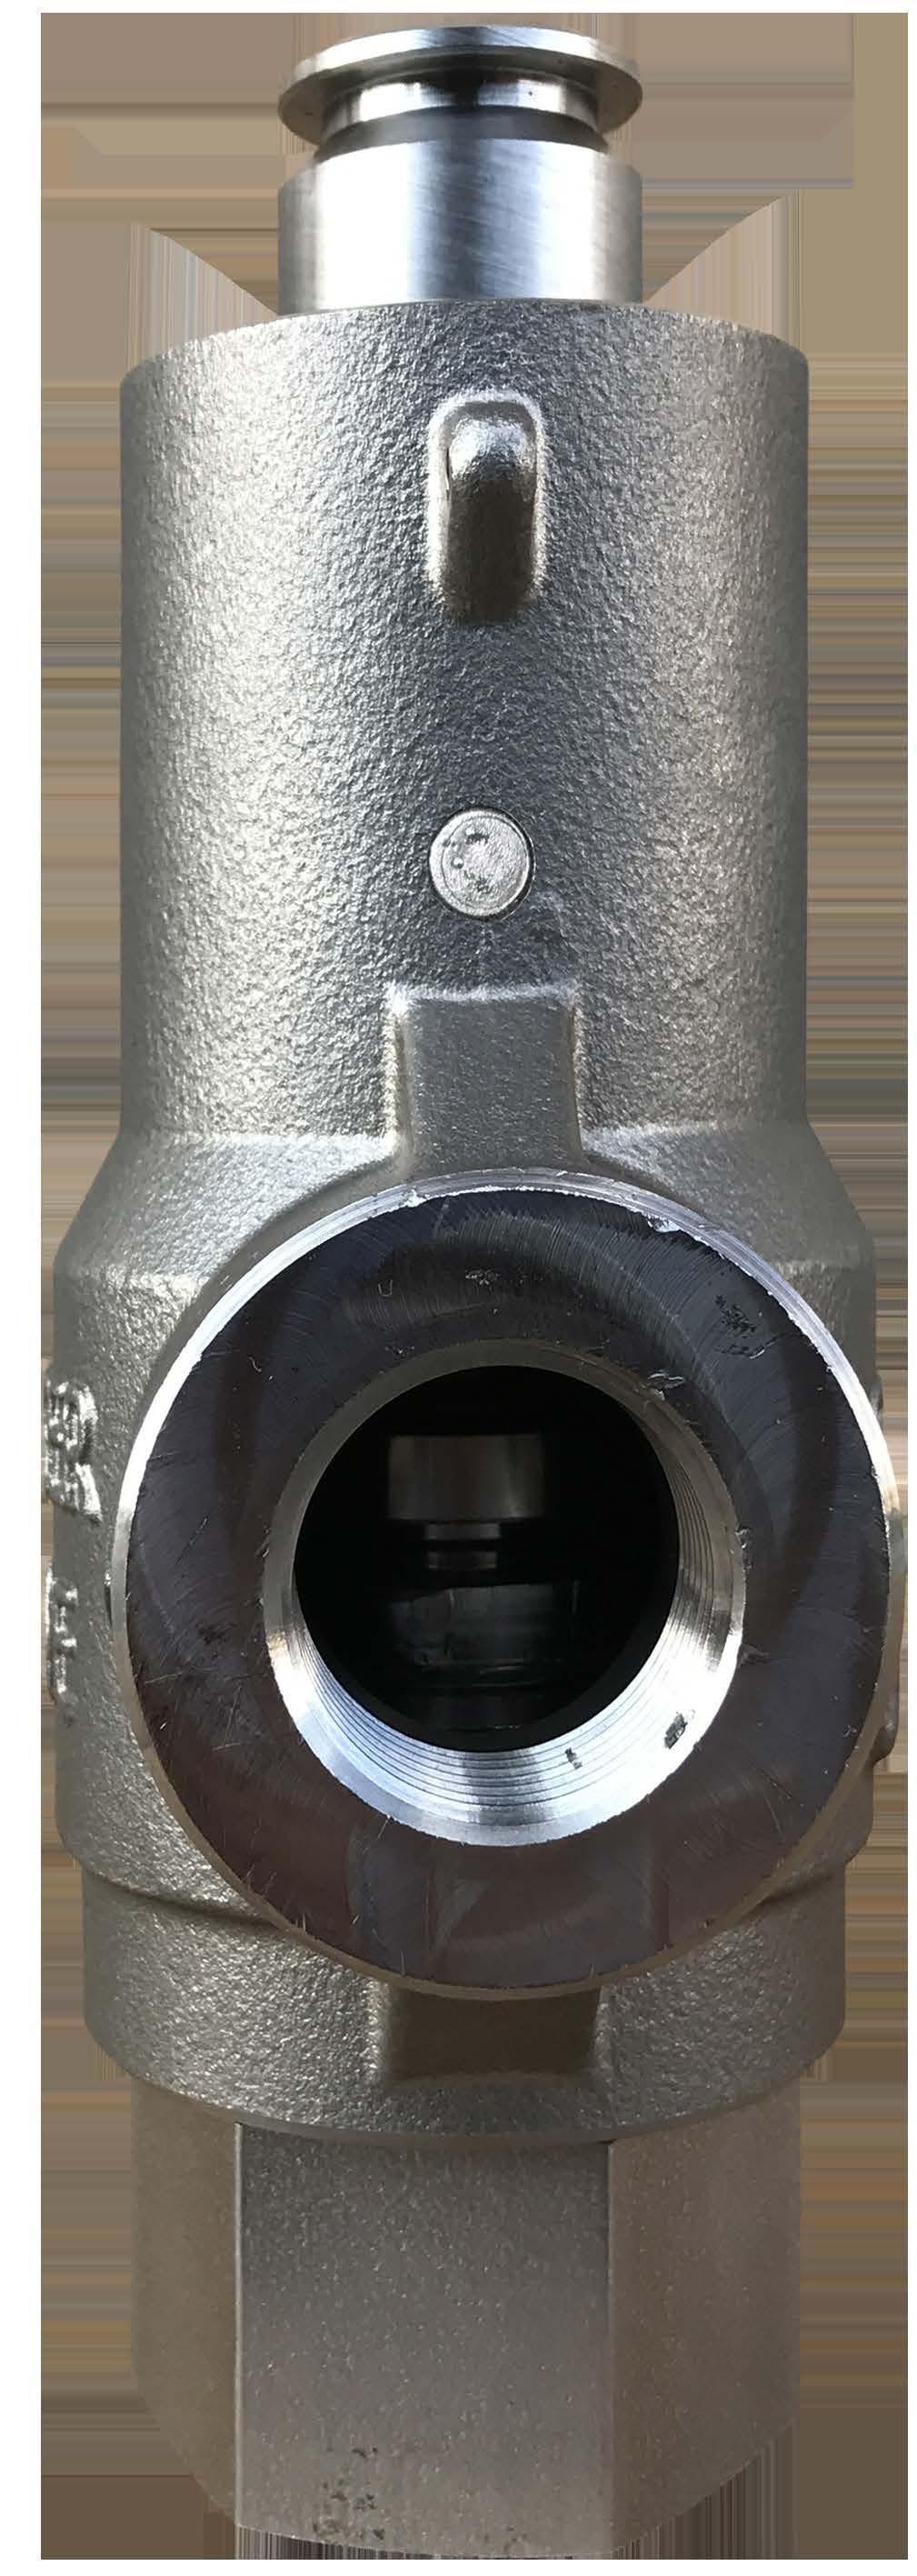 1400 Series Product Overview The 1400 Series is a safety relief valve designed for lower capacity systems.